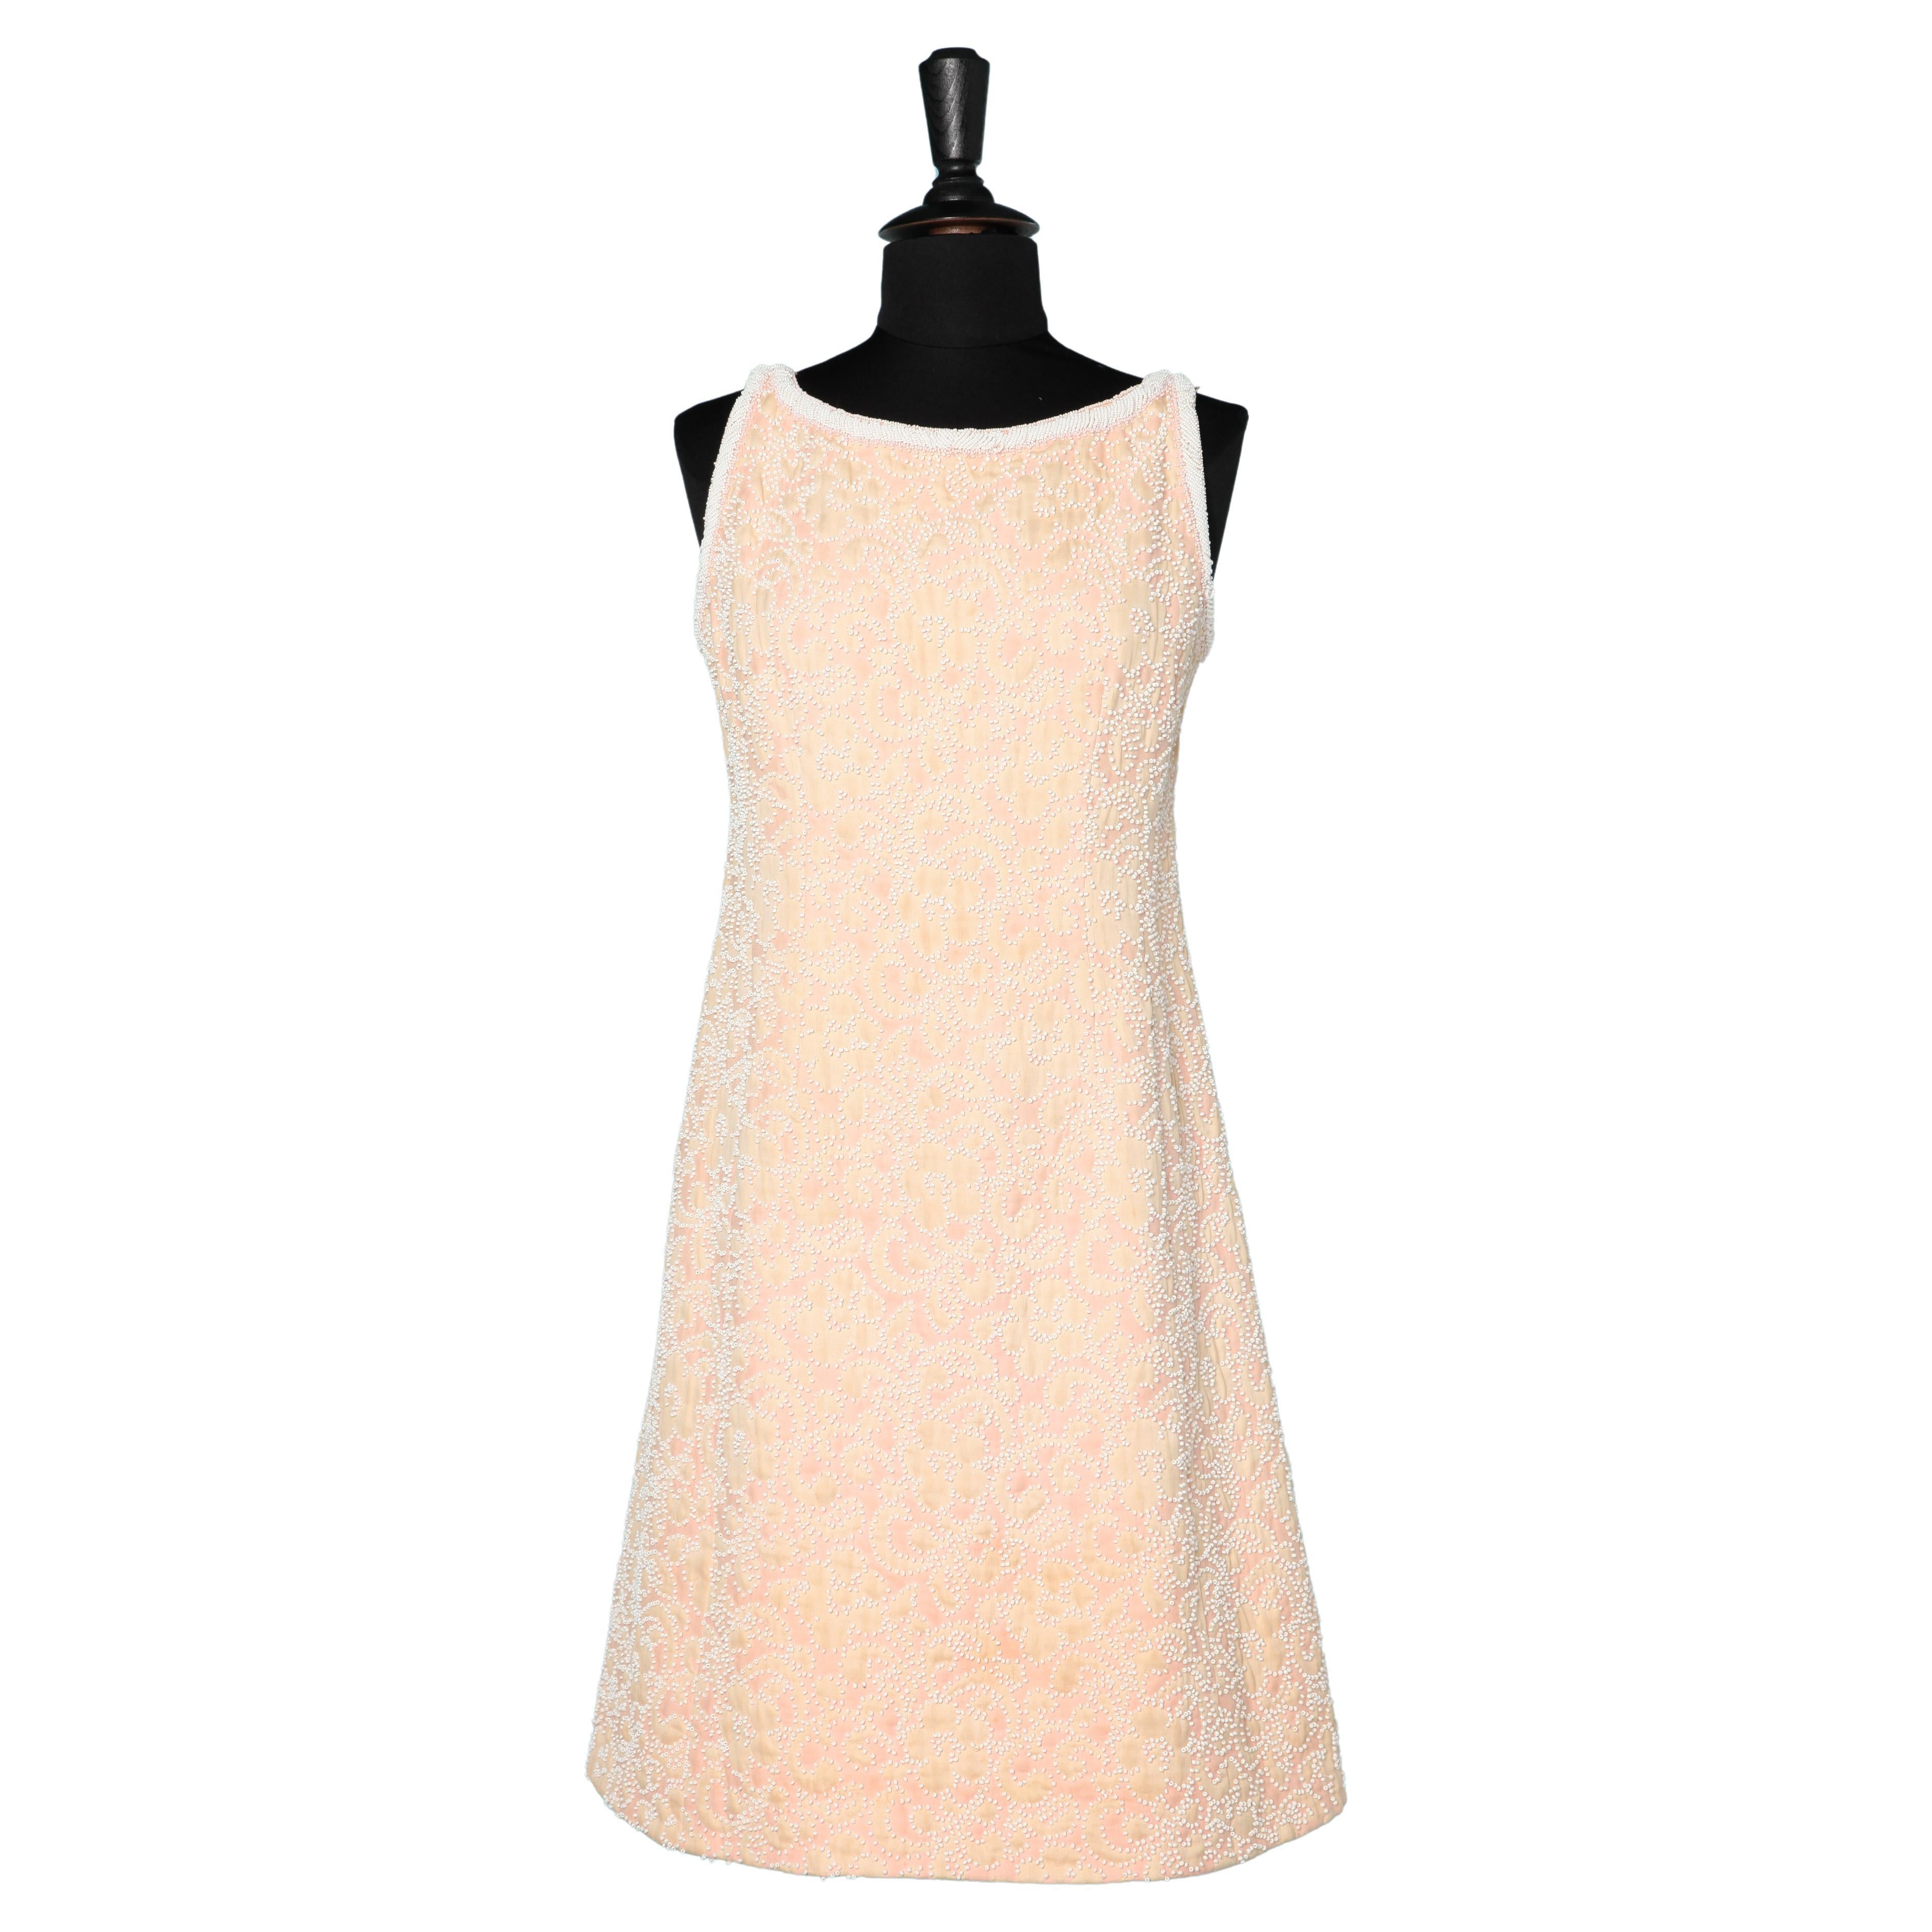 Beige and pale pink beaded cocktail dress Bergdorf Goodman On the Plaza 1967 For Sale